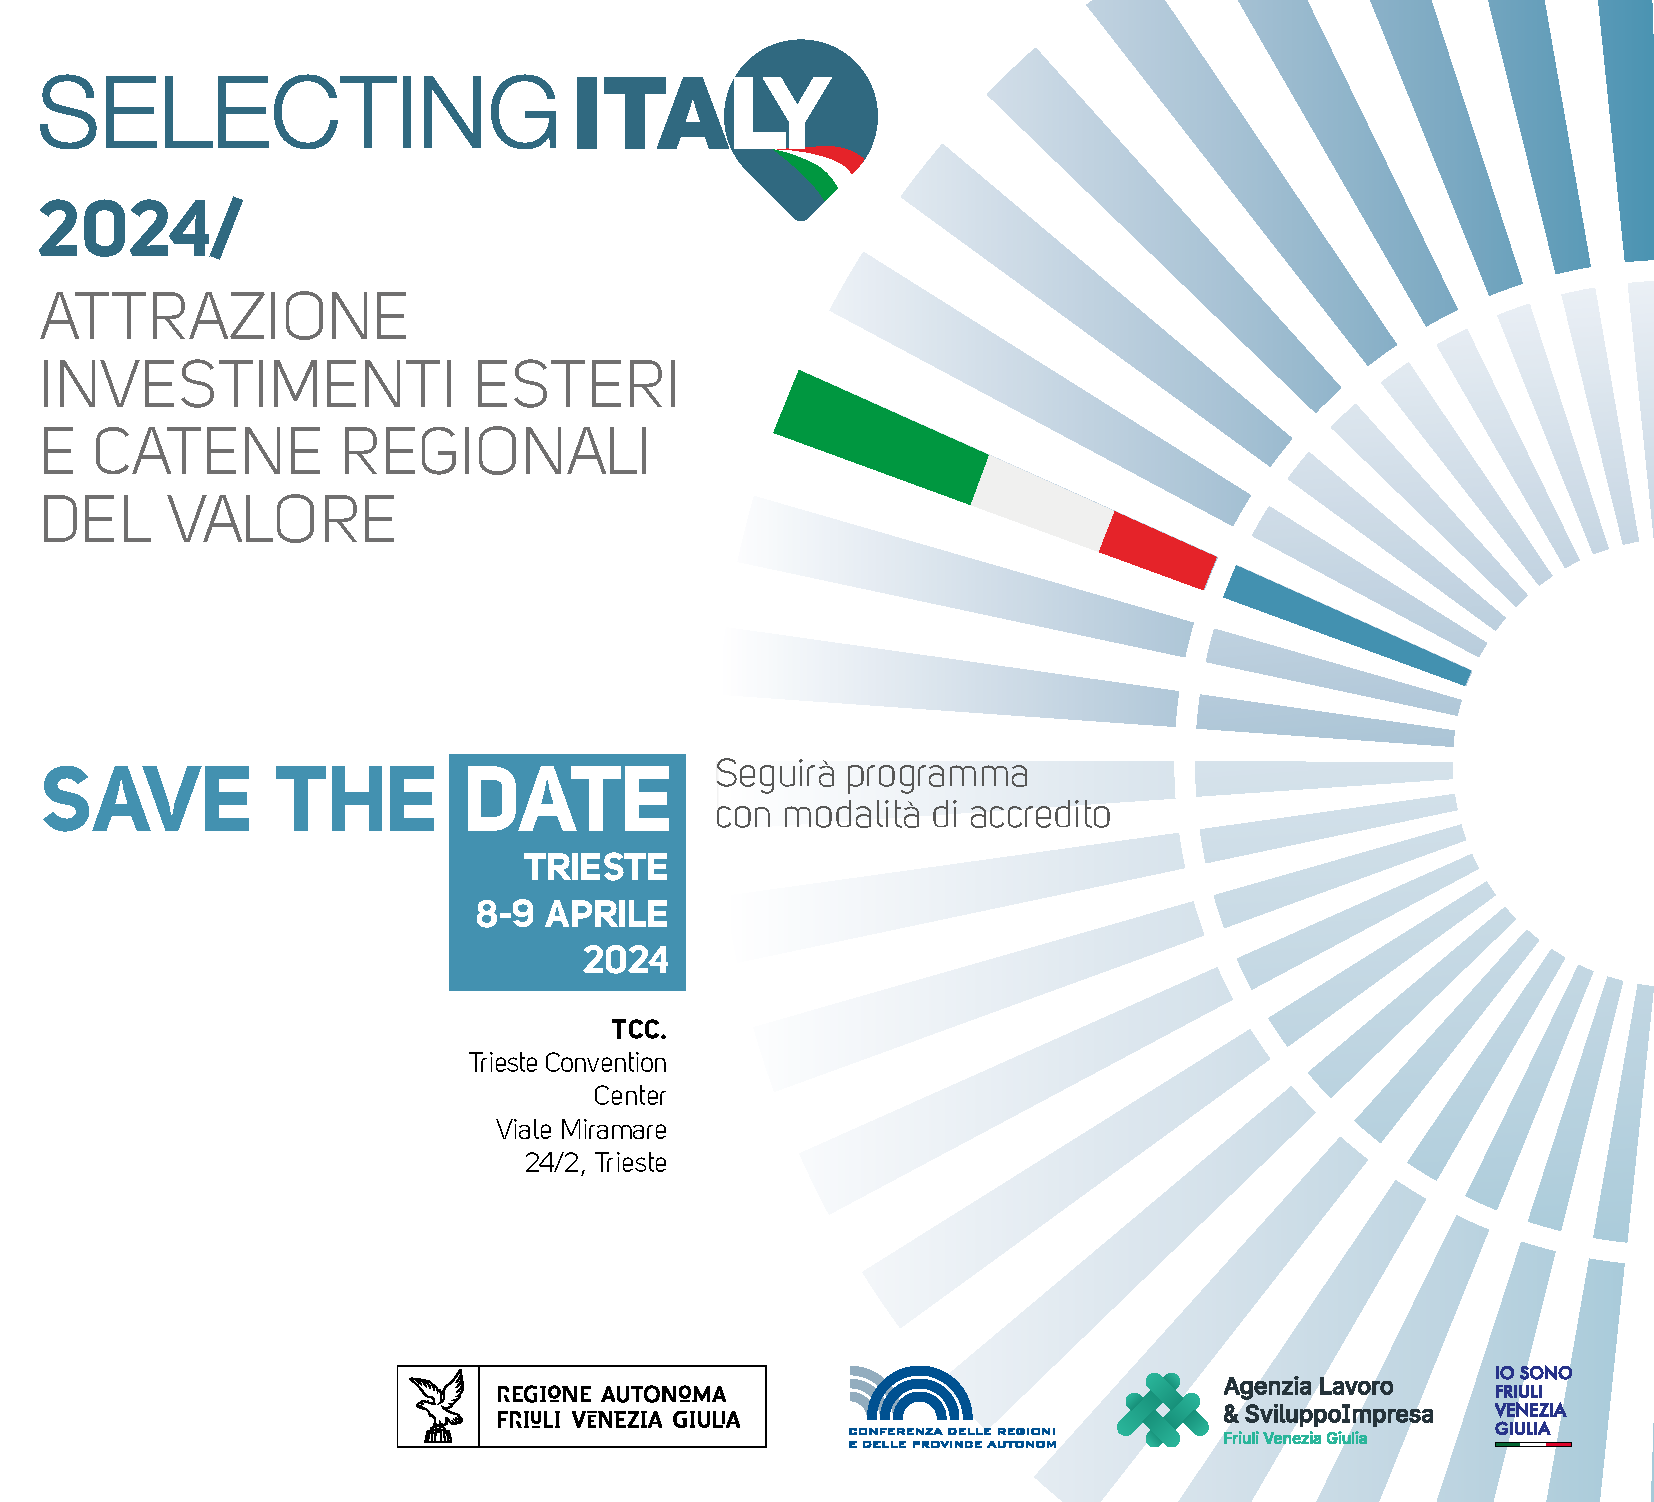 file/ELEMENTO_NEWSLETTER/26013/SAVE-THE-DATE_SELECTING-ITALY_240224.png